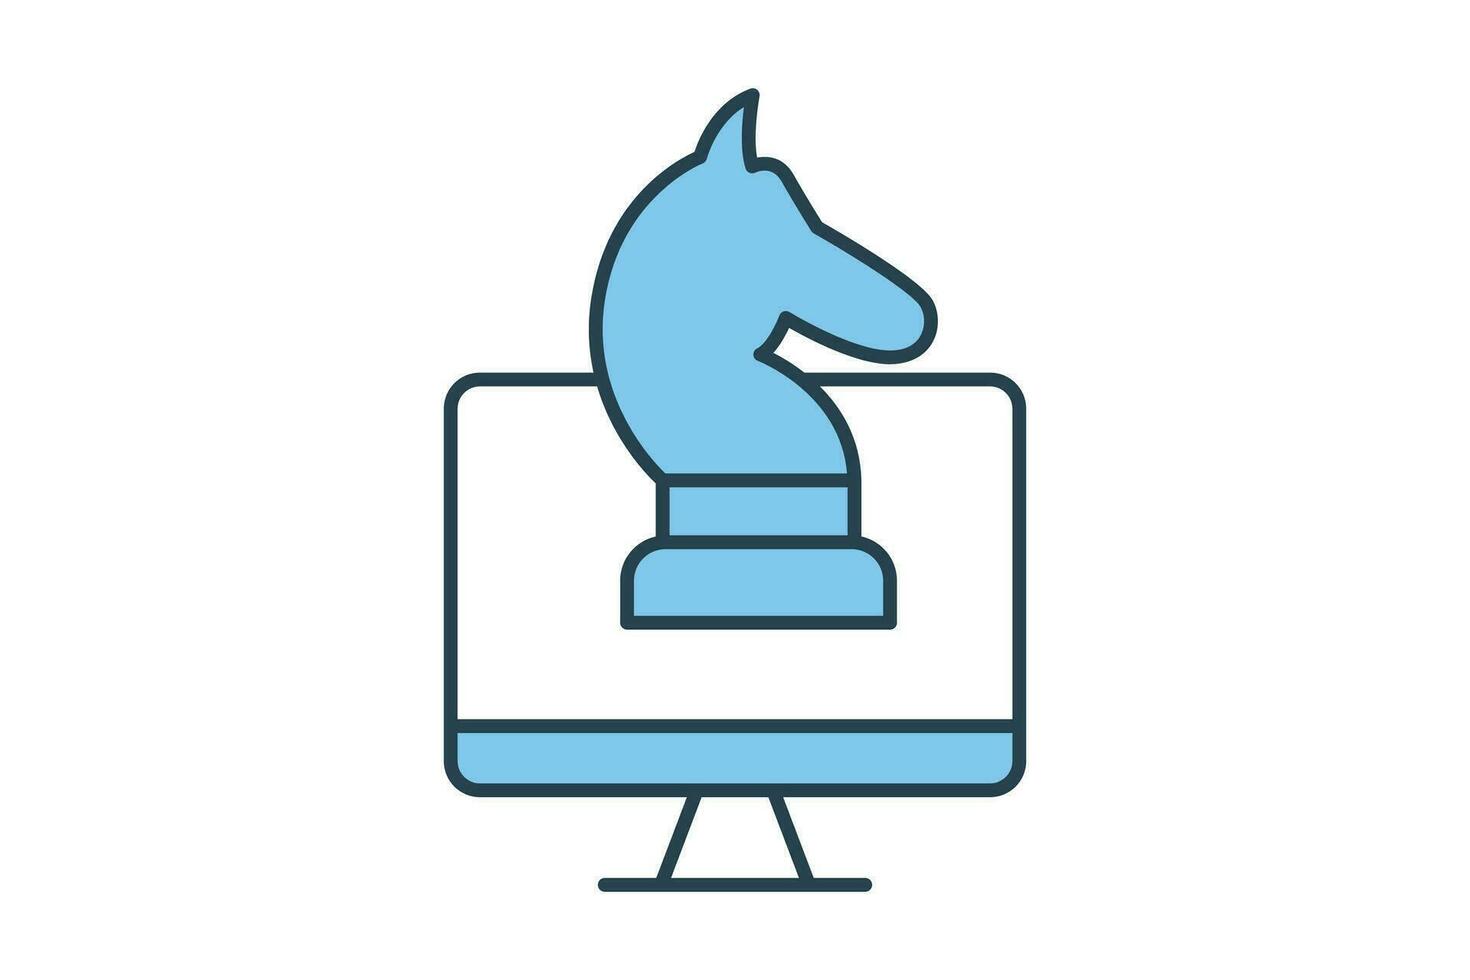 marketing strategy icon. Monitor screen with chess horse. icon related to strategy, digital marketing. Flat line icon style design. Simple vector design editable